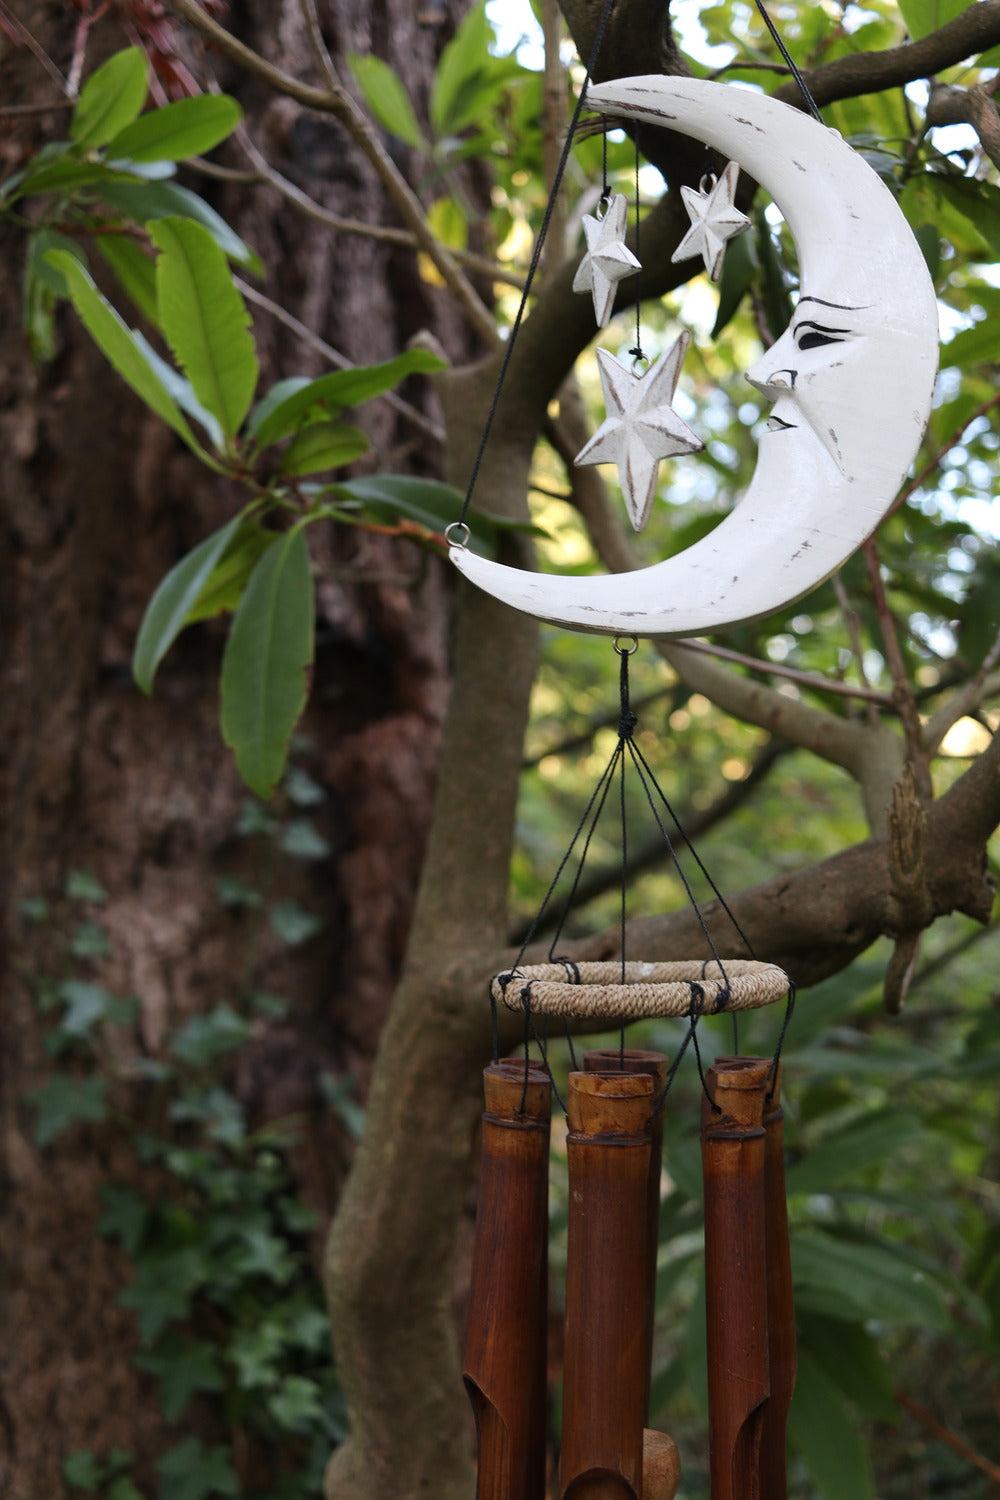 Distressed White Crescent Moon Bamboo Wind Chime